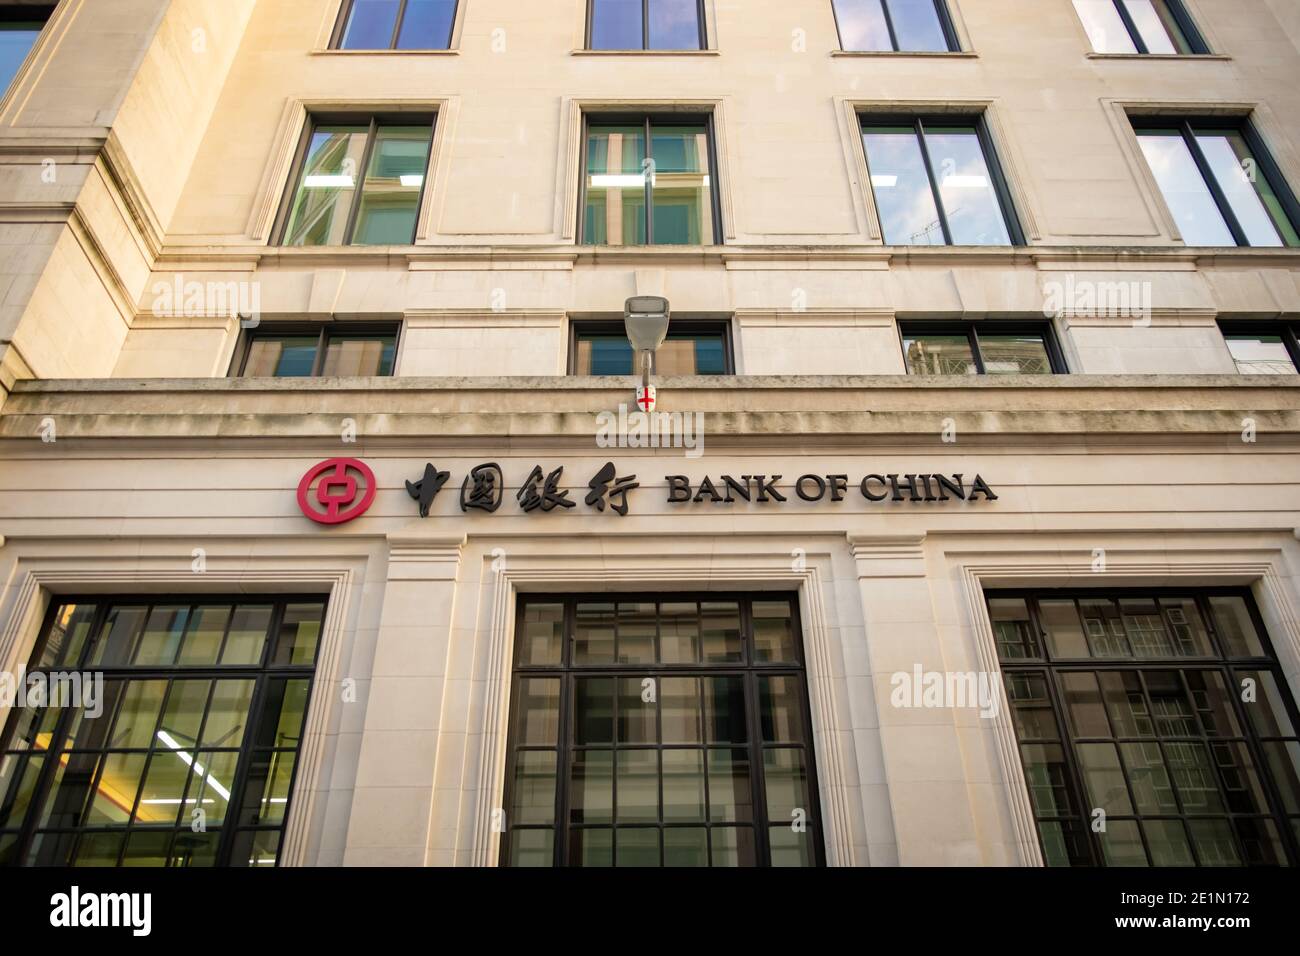 LONDON- Bank of China exterior signage- London branch of the Chinese state-owned commercial bank Stock Photo